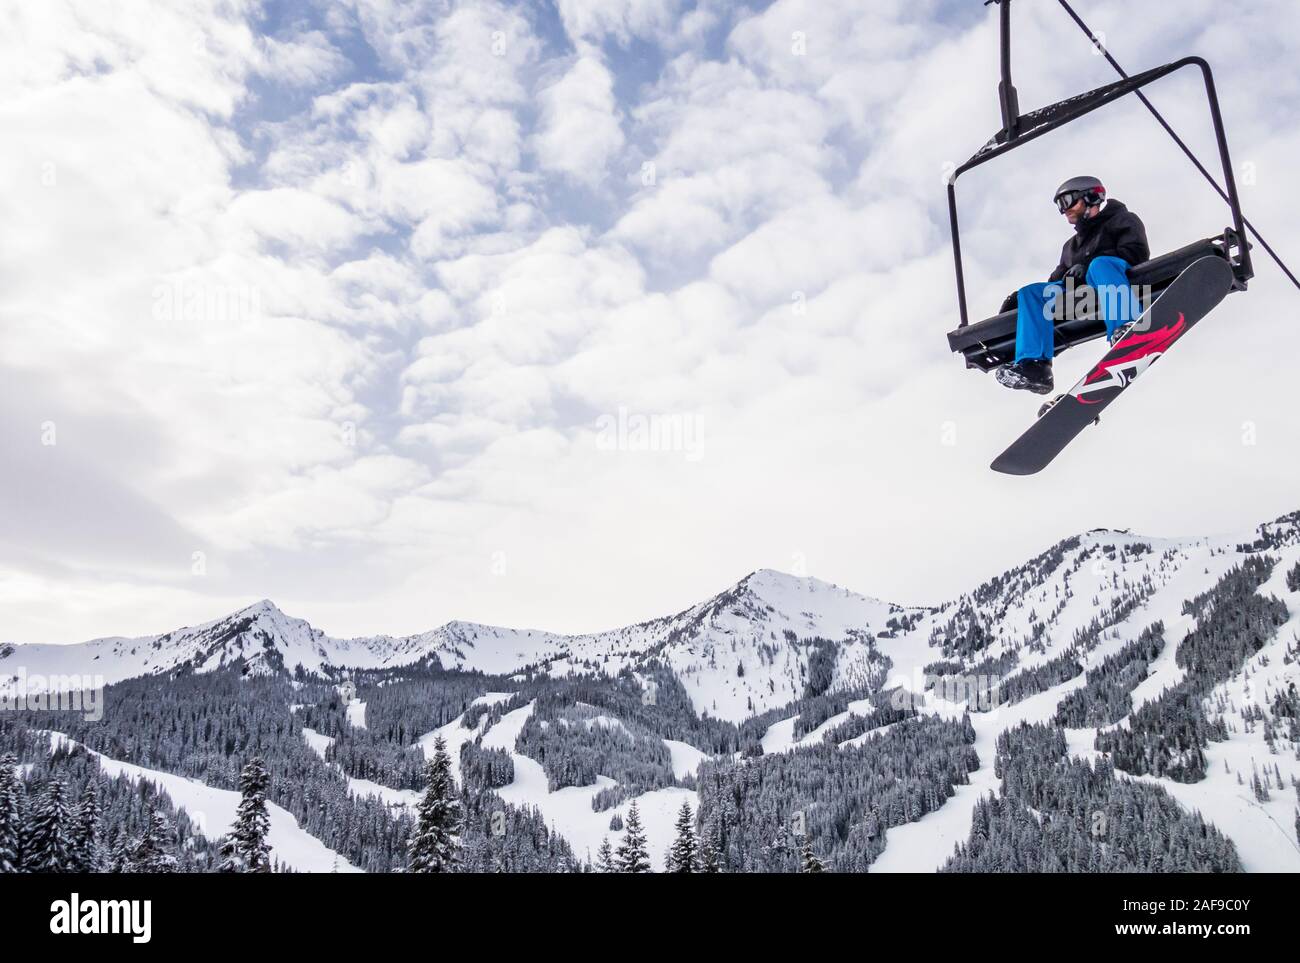 A snowboarder sitting on a chairlift above Crystal Mountain Resort, Washington State, USA. Stock Photo